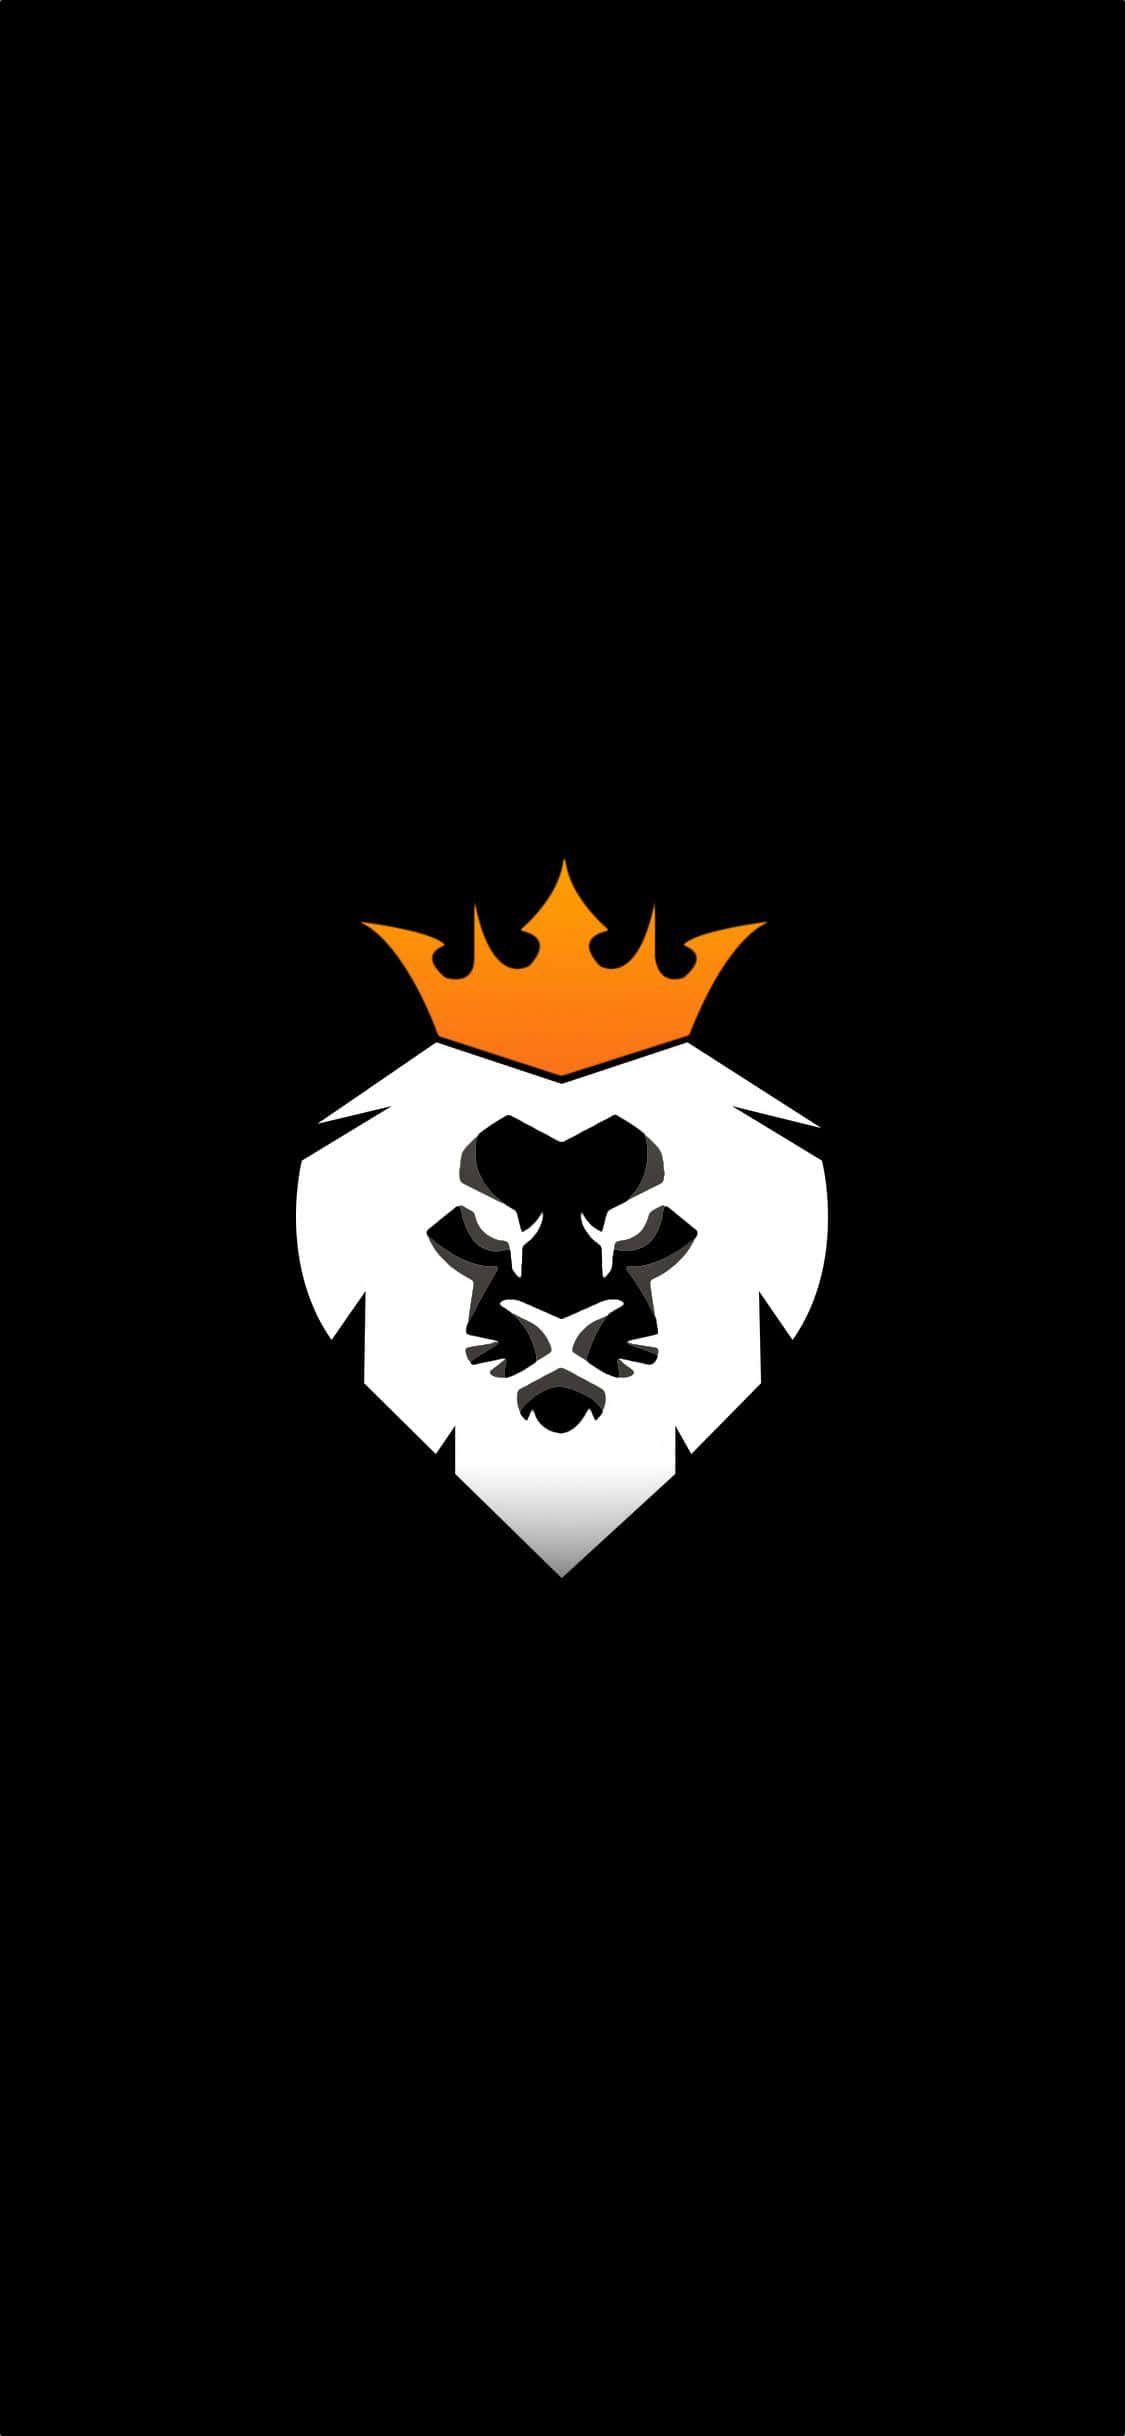 A Lion Logo With A Crown On A Black Background